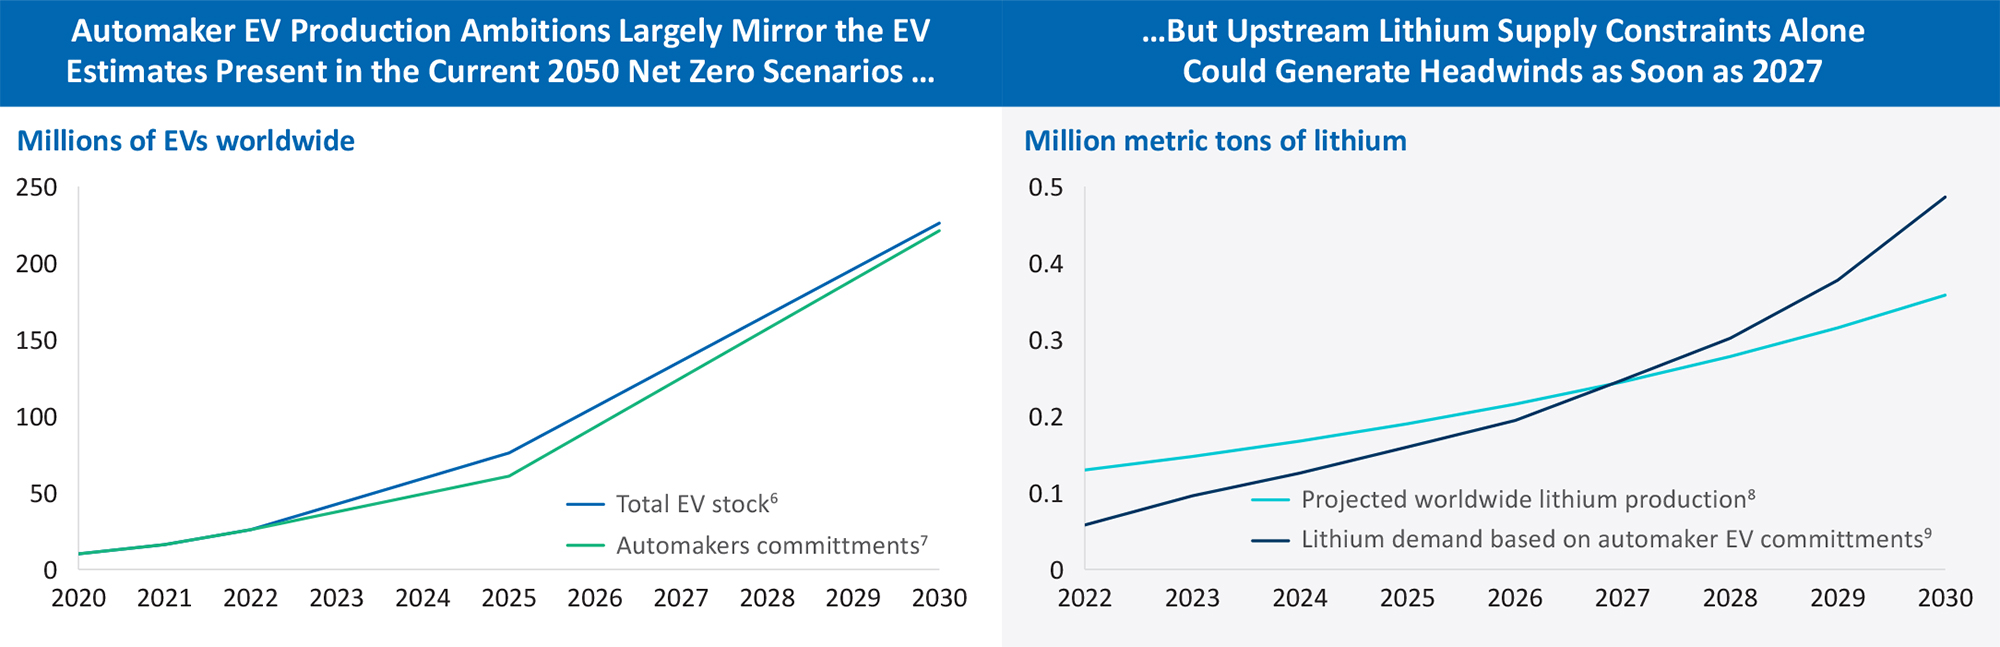 The Ambition For Electrification Of Transport Is There, But Supply Chain Headwinds For Lithium May Be Limiting As Soon As 2027